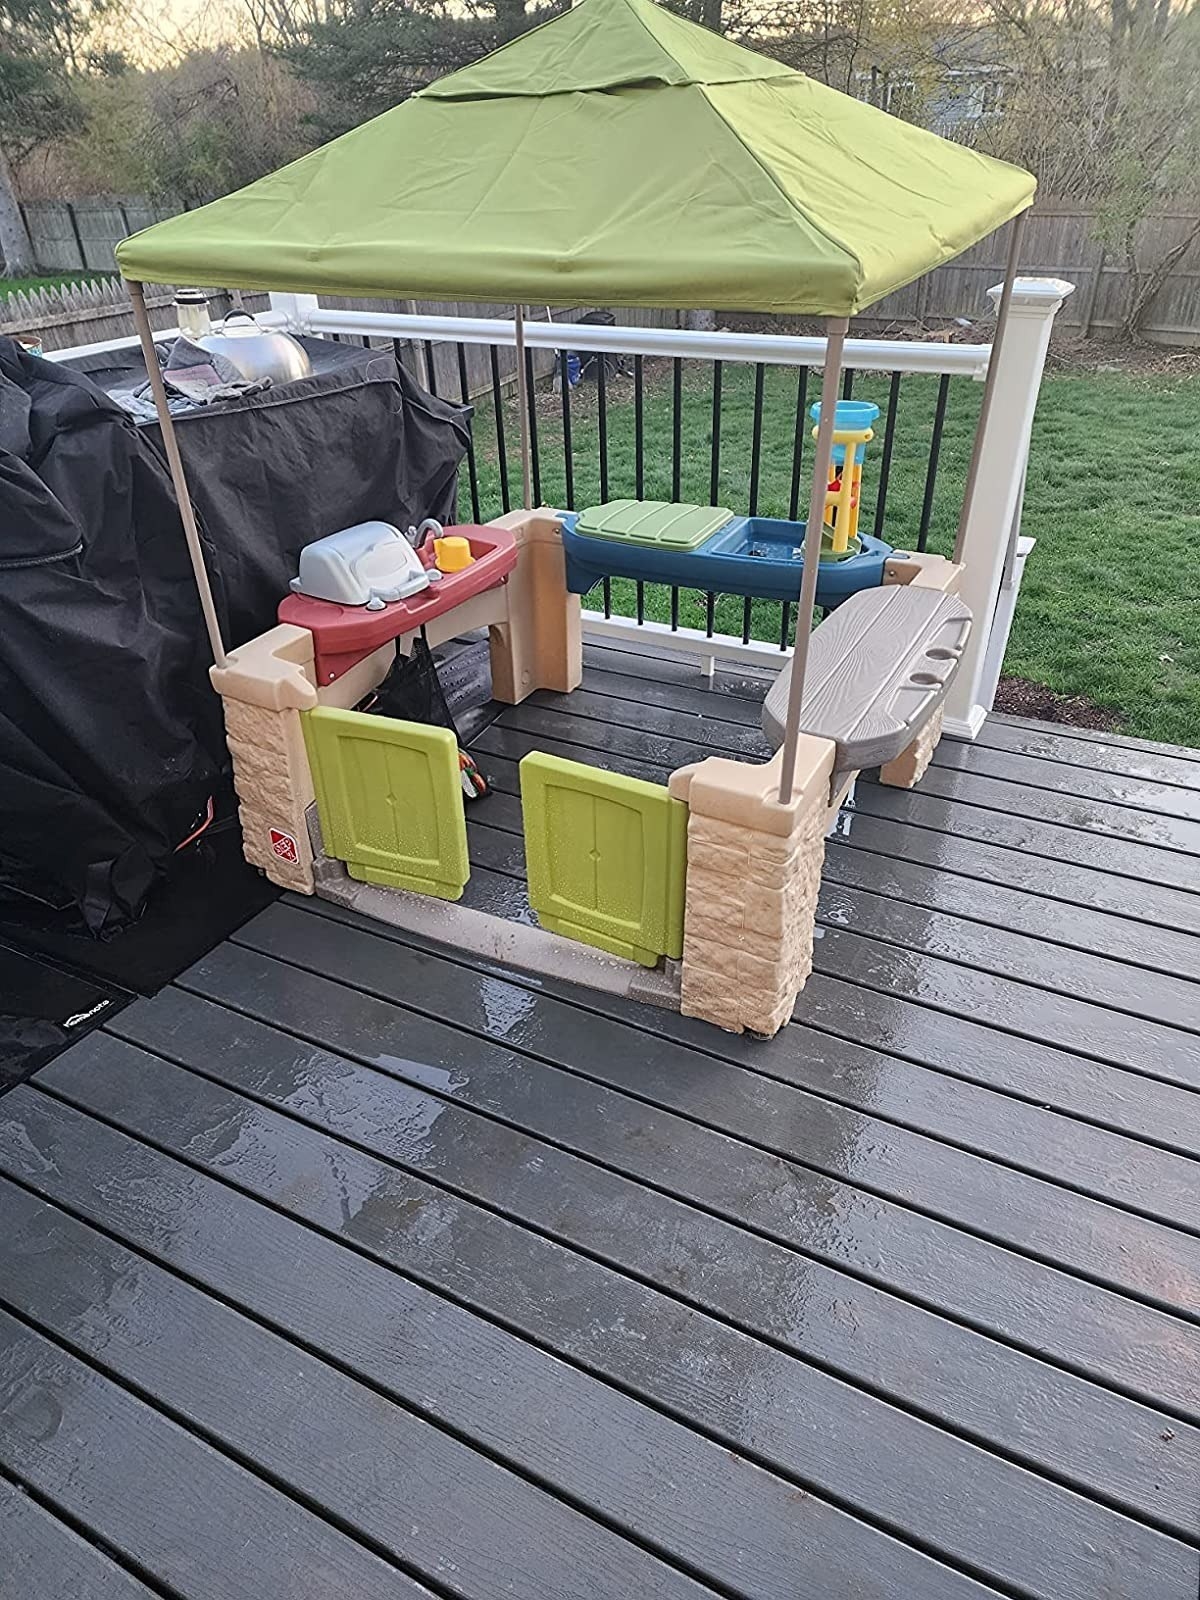 Playset on a porch